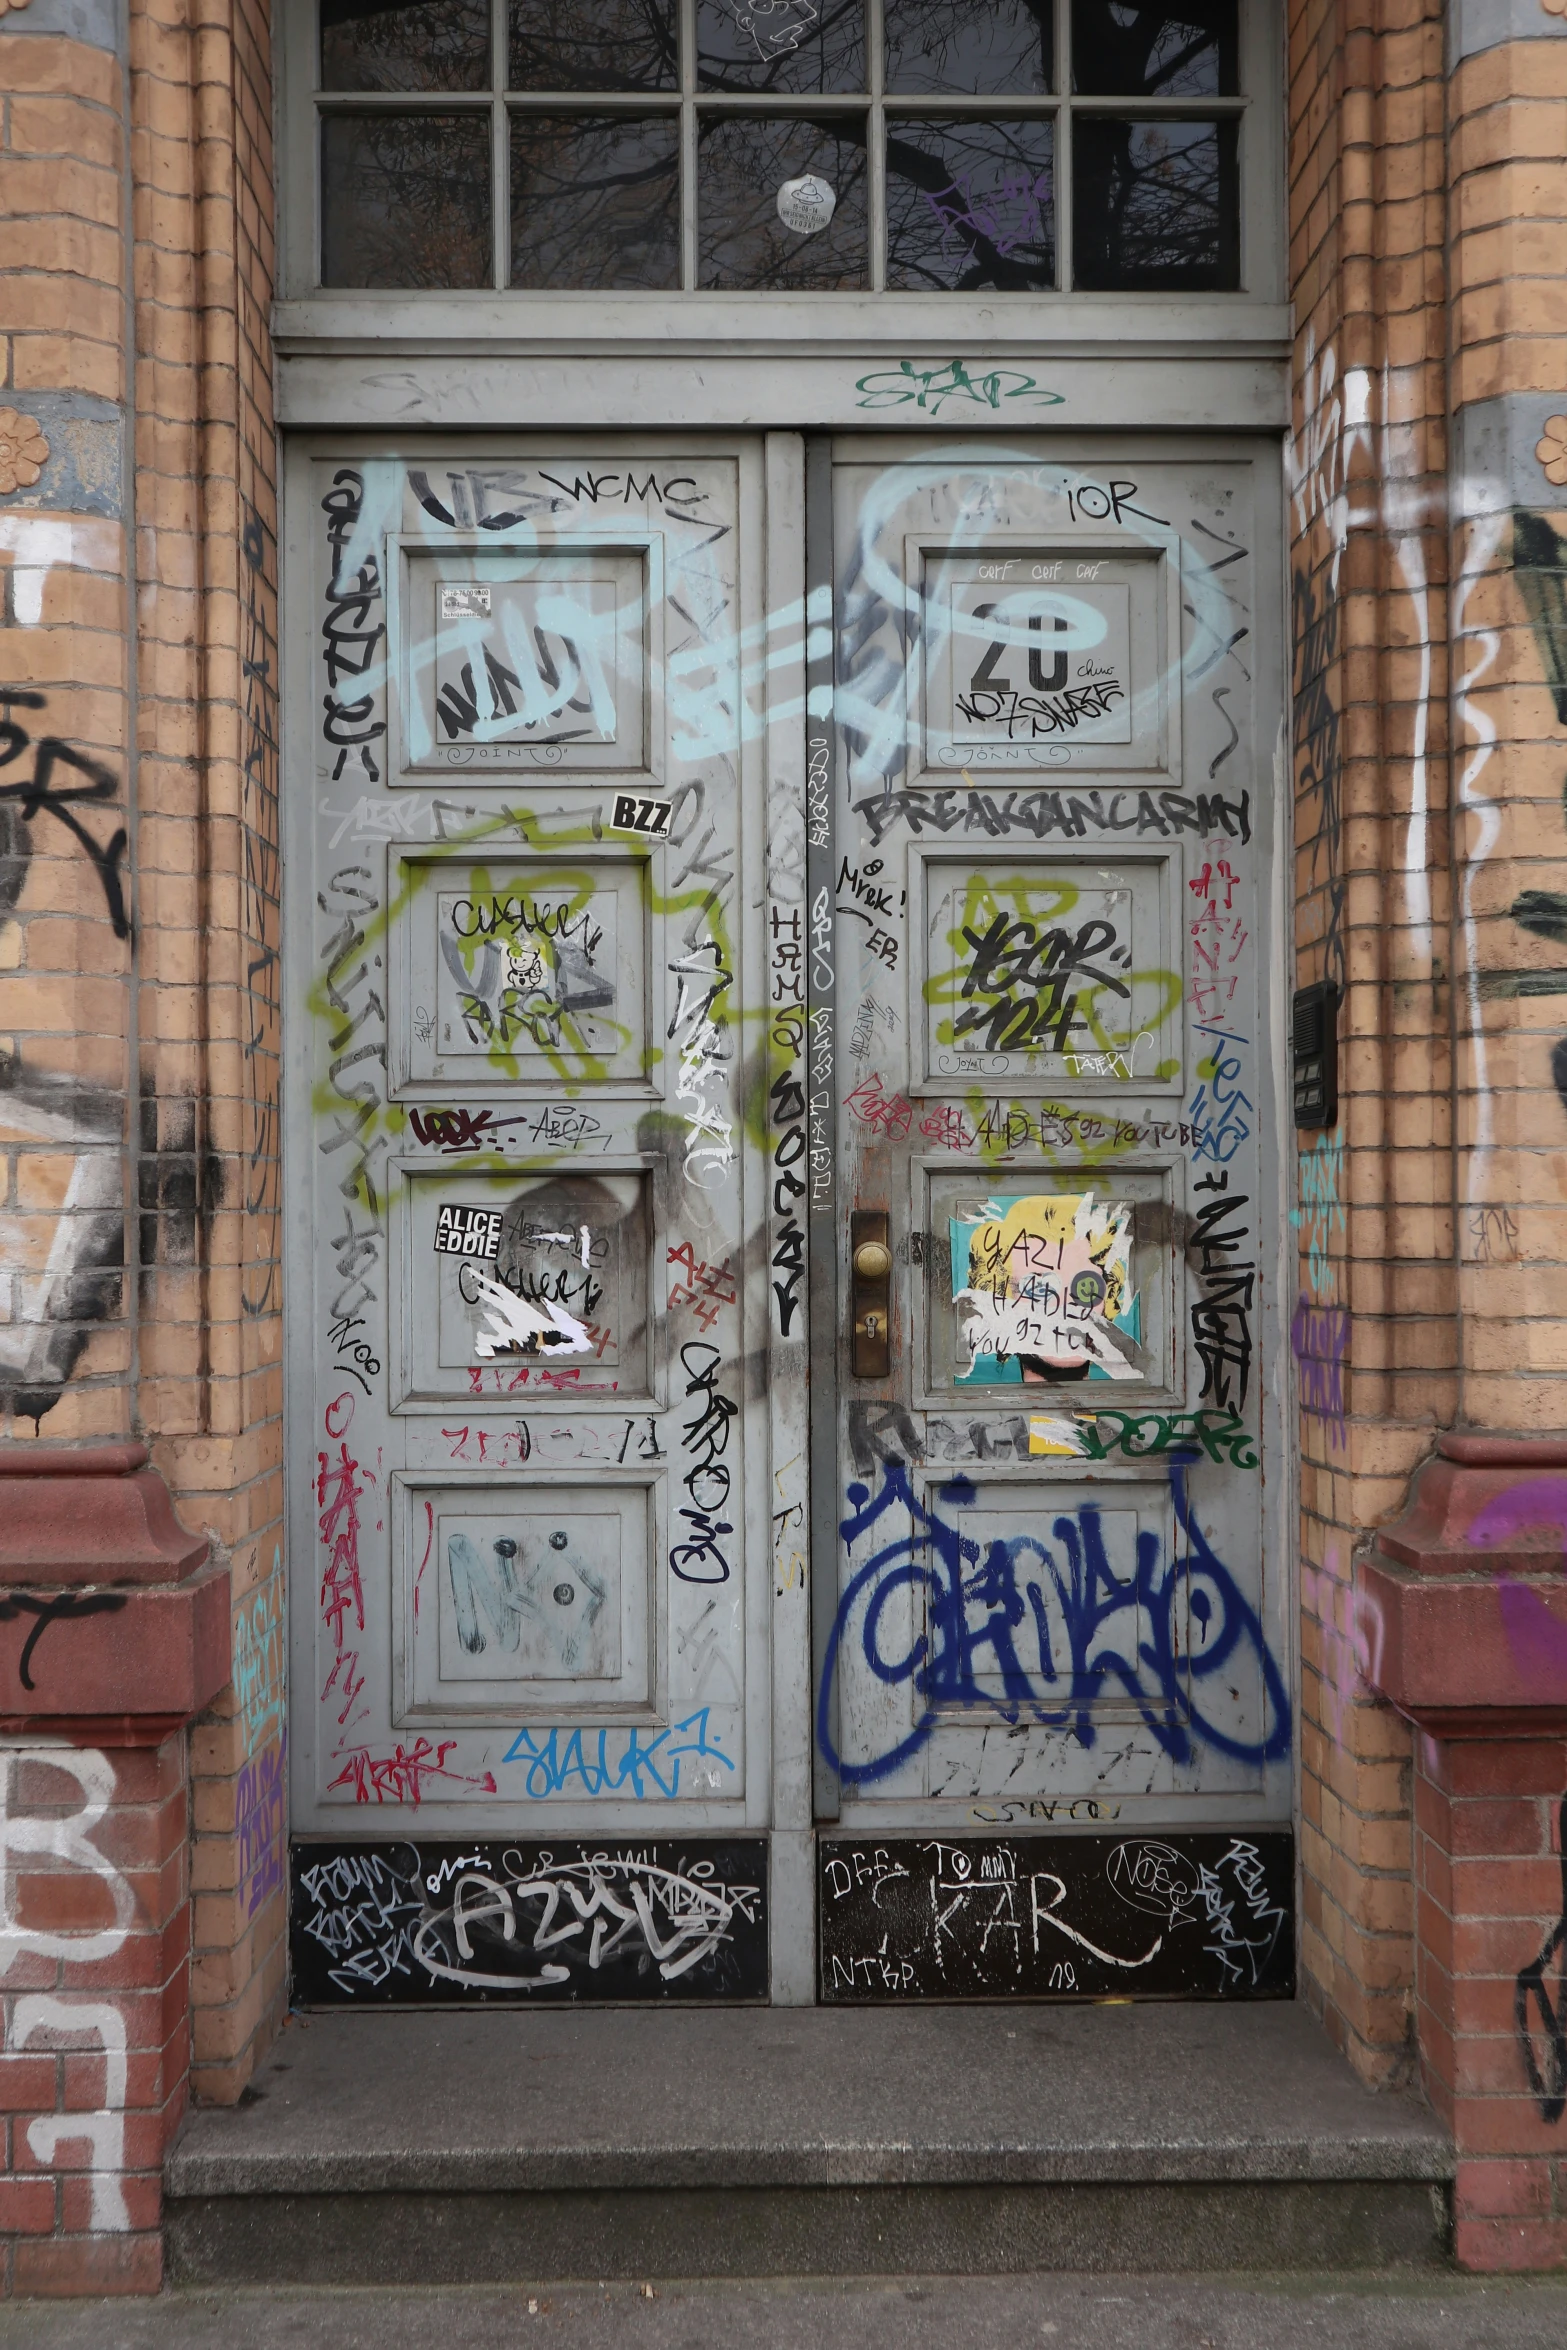 the doors are covered with lots of graffiti